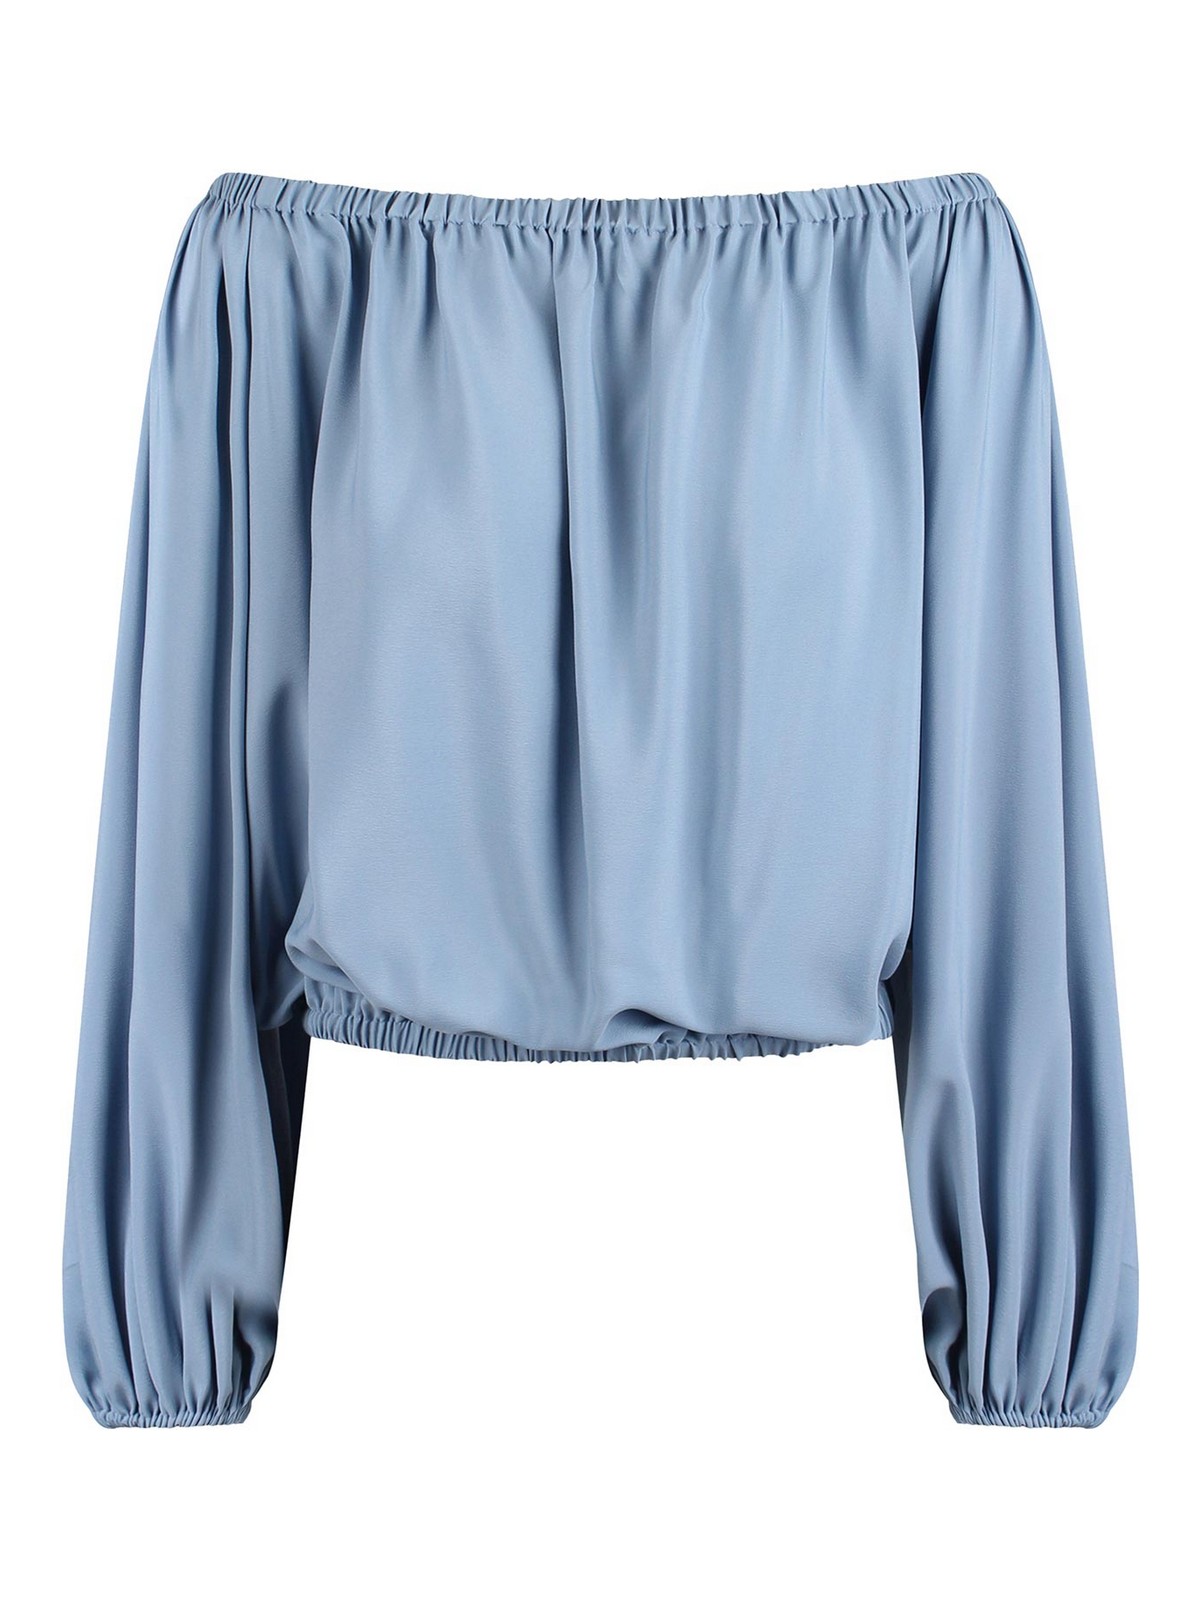 Federica Tosi Blouse With Square Neckline In Blue